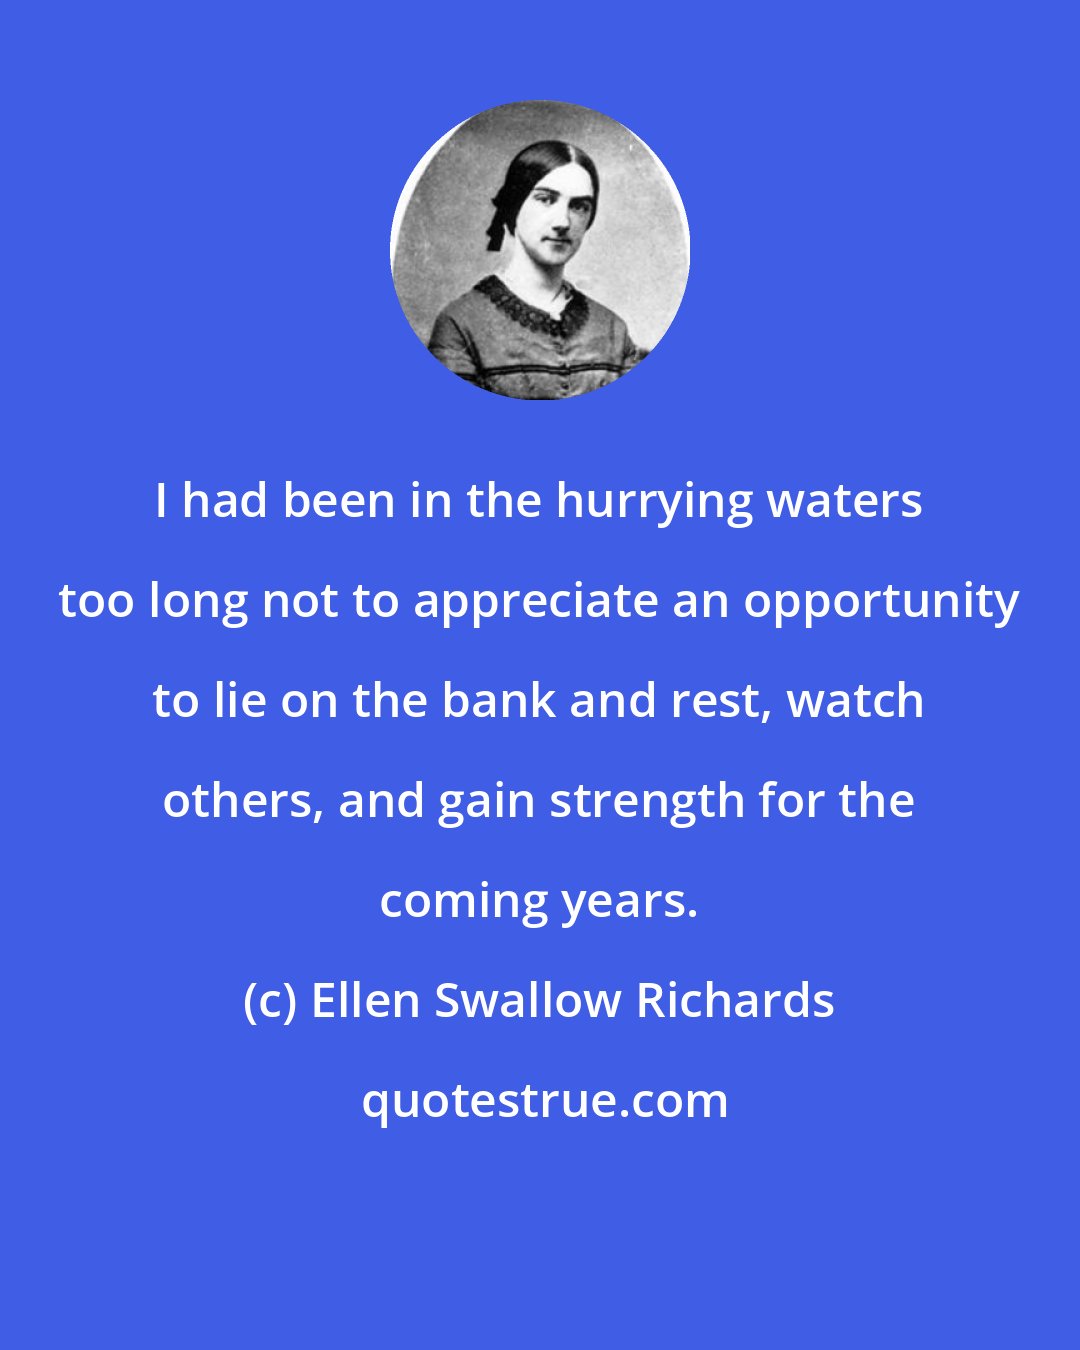 Ellen Swallow Richards: I had been in the hurrying waters too long not to appreciate an opportunity to lie on the bank and rest, watch others, and gain strength for the coming years.